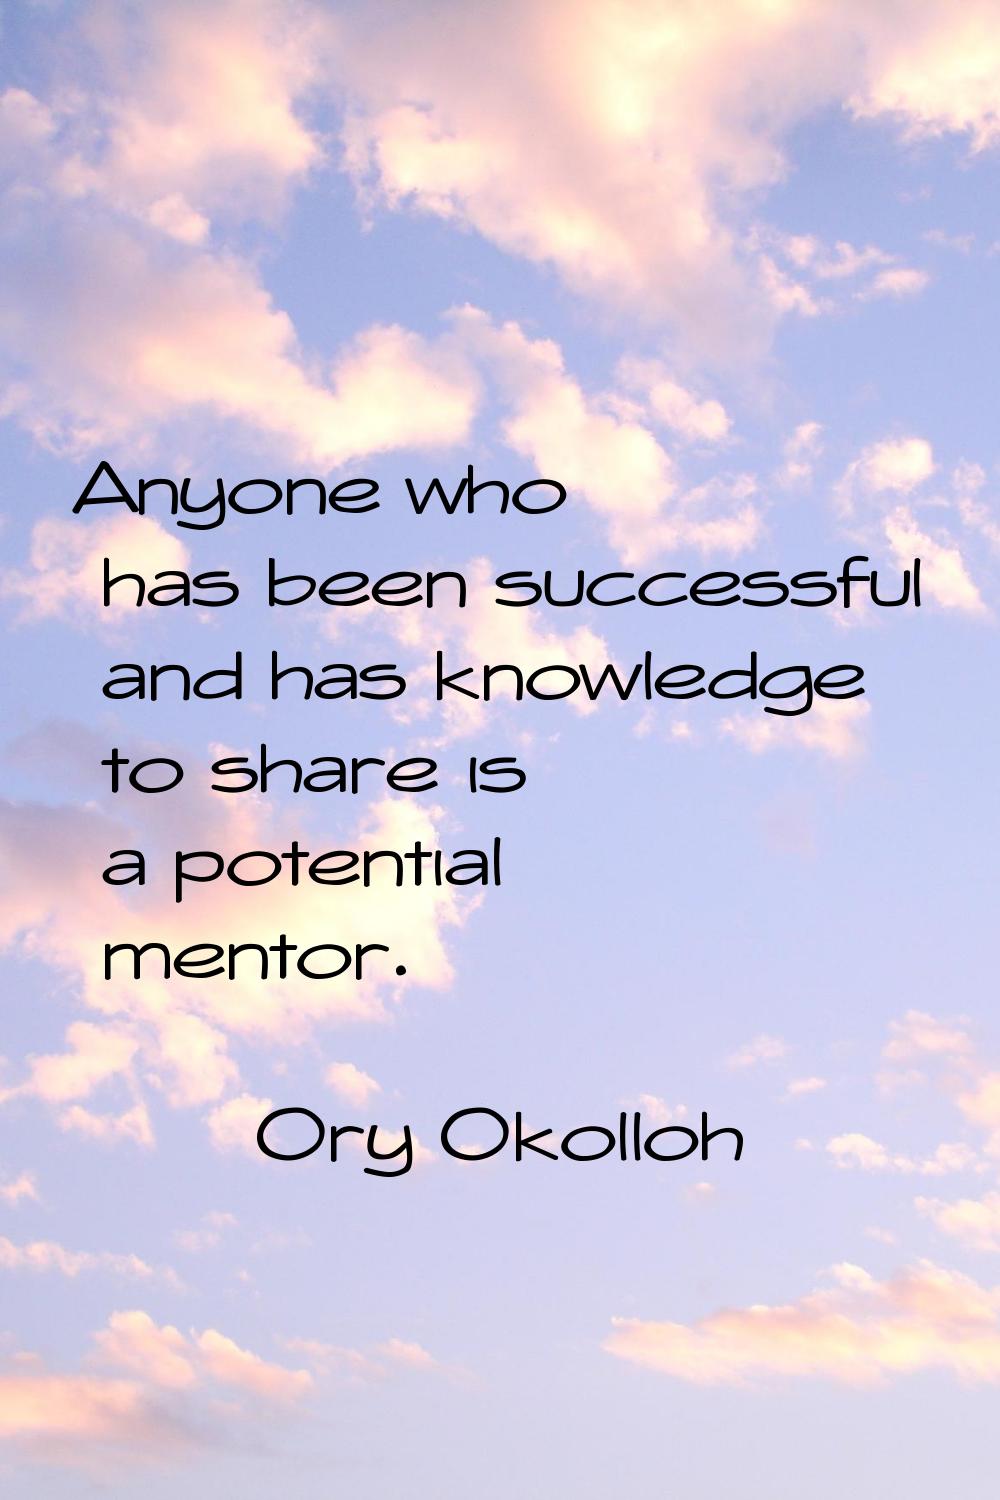 Anyone who has been successful and has knowledge to share is a potential mentor.